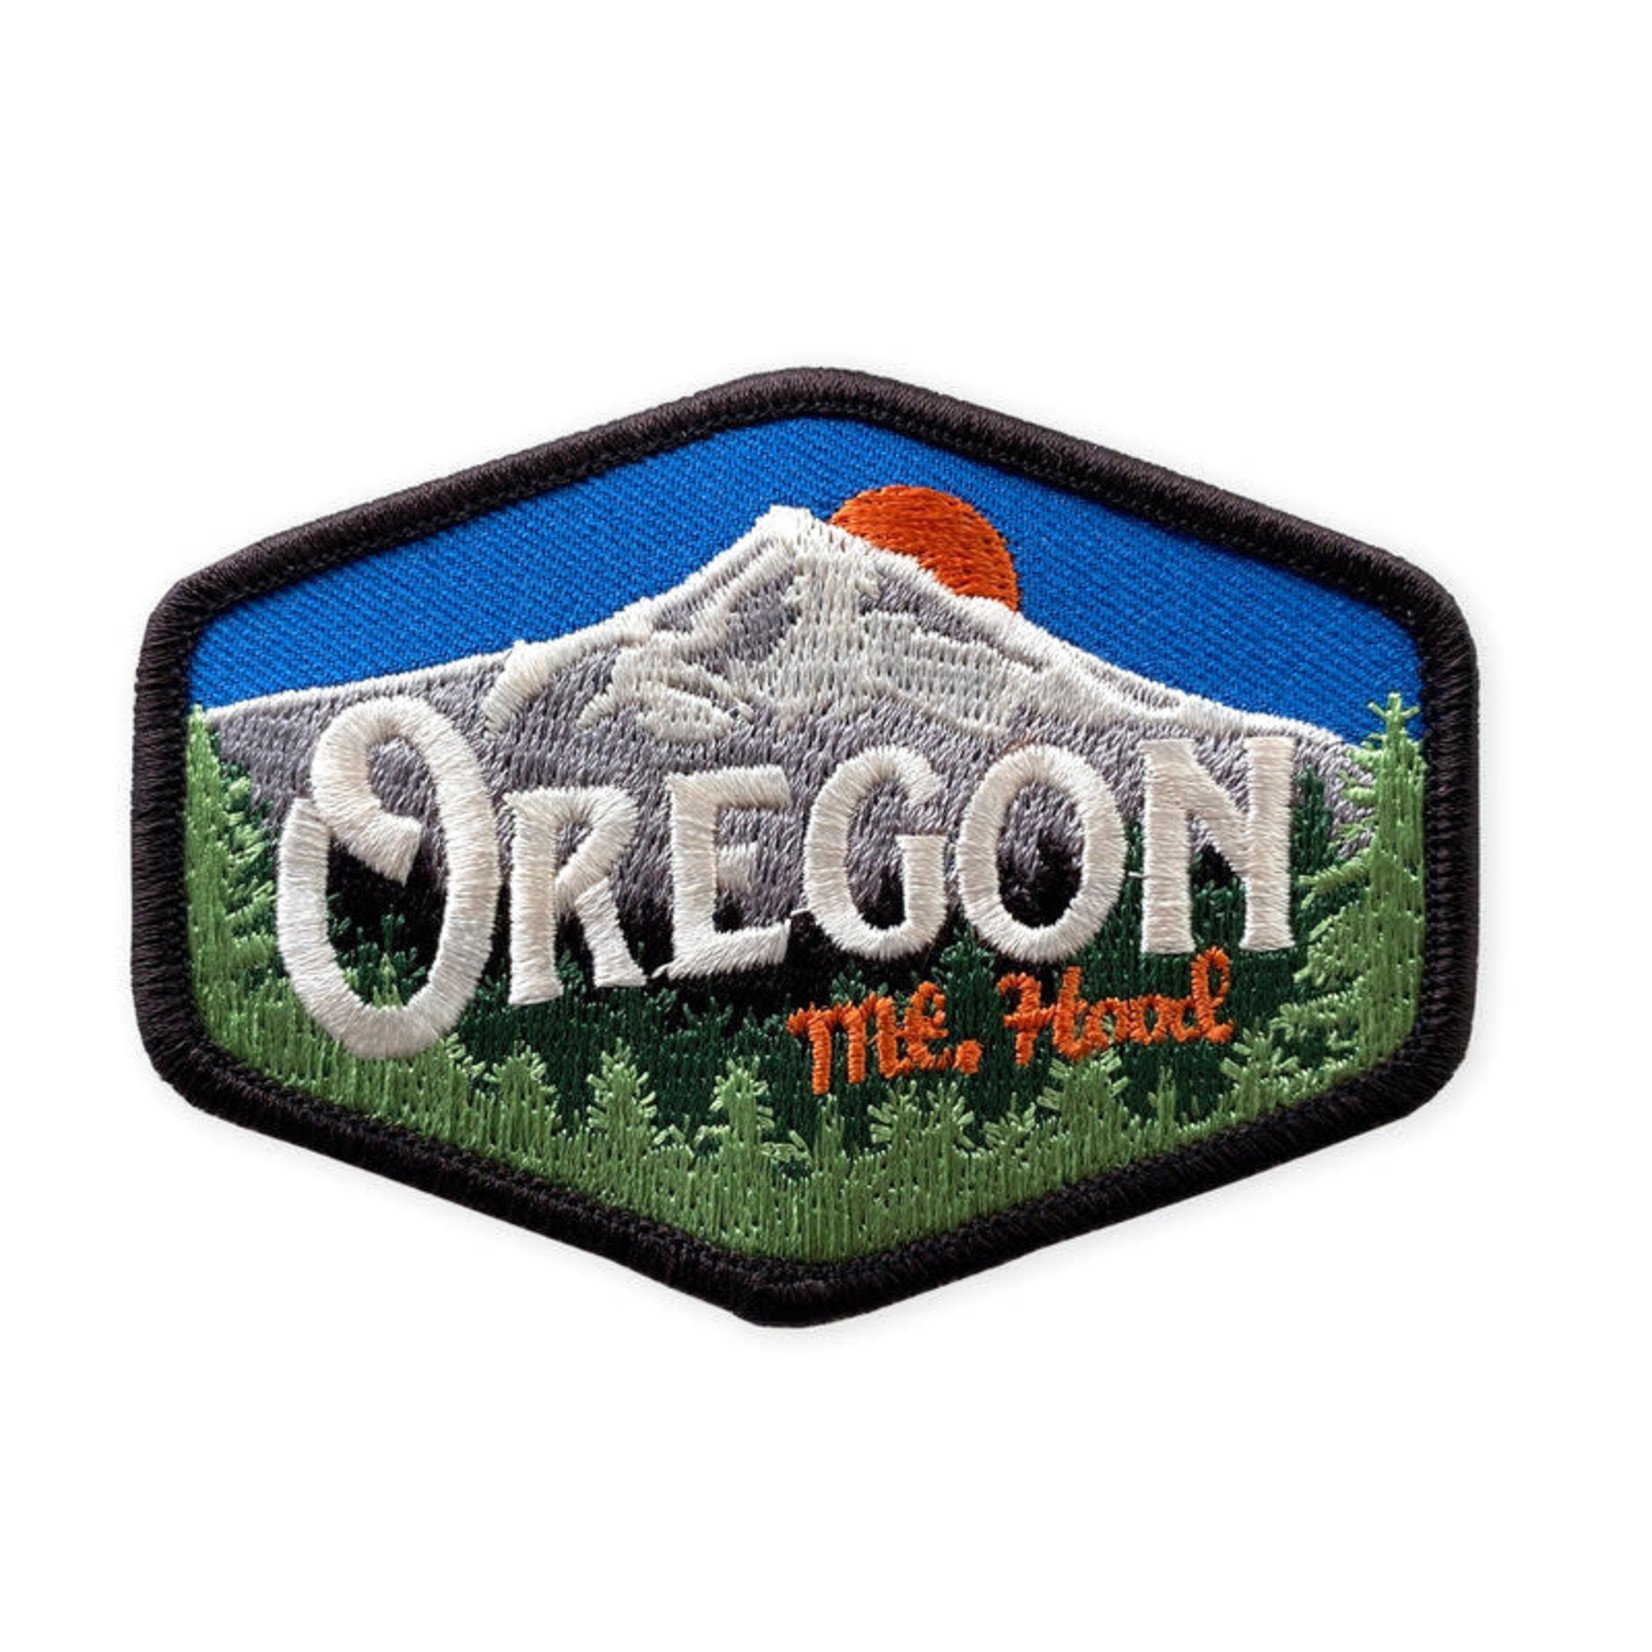 Patches OR Mount Hood Patch